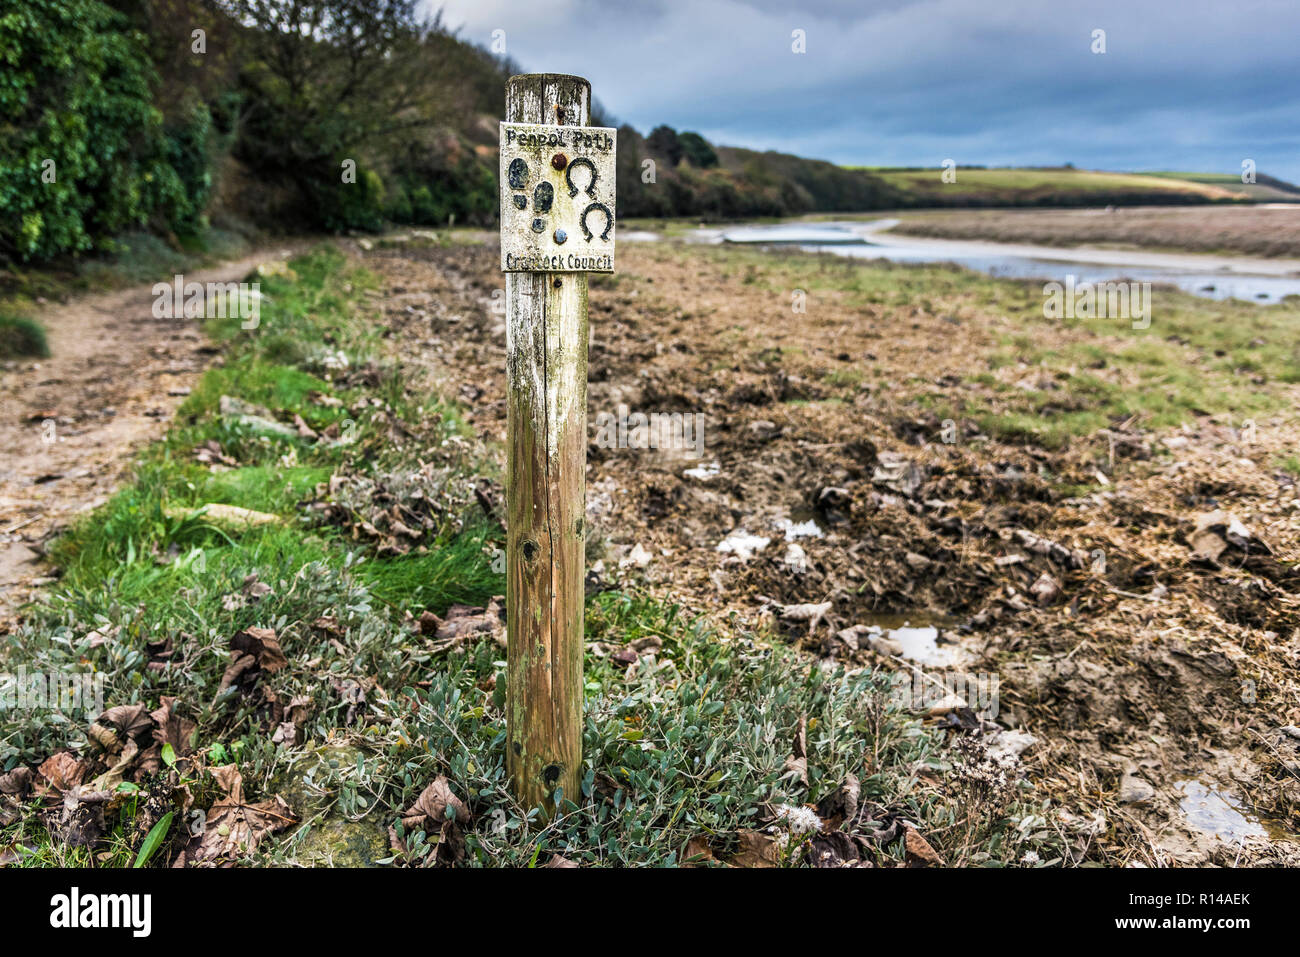 The Penpol footpath bridle path bridleway on the bank of the Gannel River in Newquay in Cornwall. Stock Photo